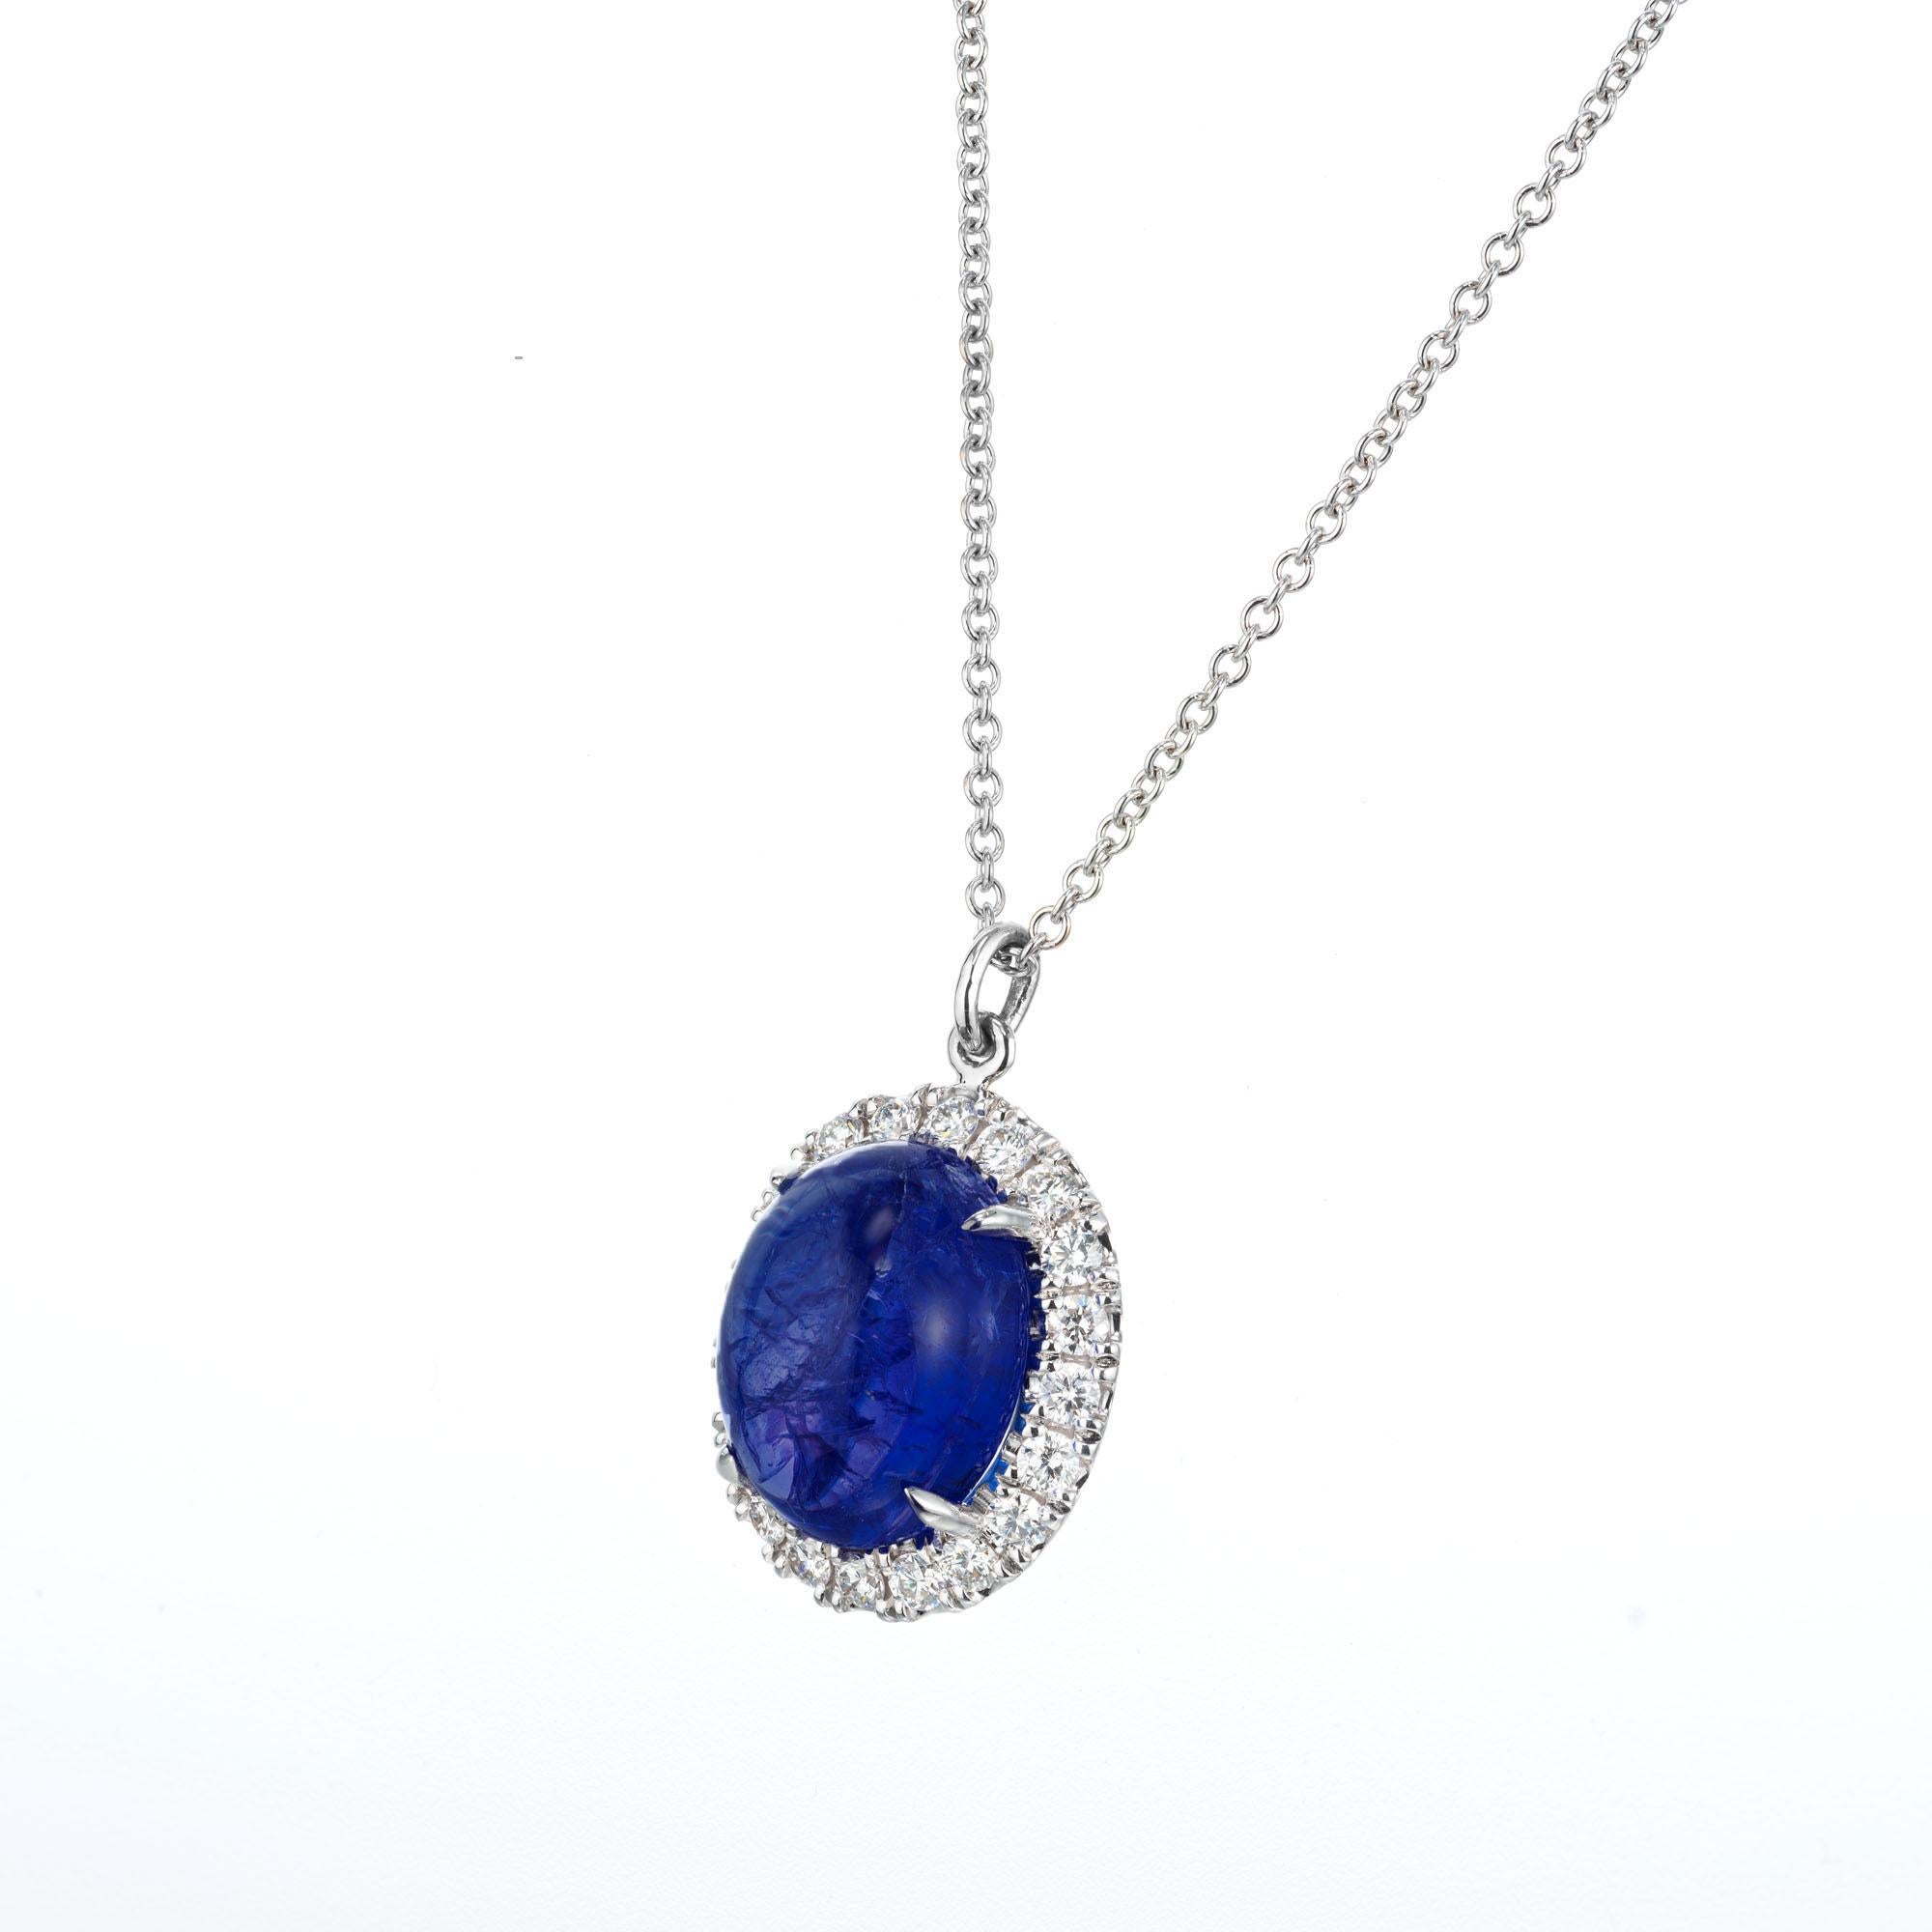 Oval Blue 7.00 carat tanzanite with a halo of round brilliant cut diamonds set in 18k white gold on a 18 inch long chain. Created and crafted in the Peter Suchy Workshop. 

1 oval cabochon blue tanzanite, I approx. 7.00cts
20 round brilliant cut